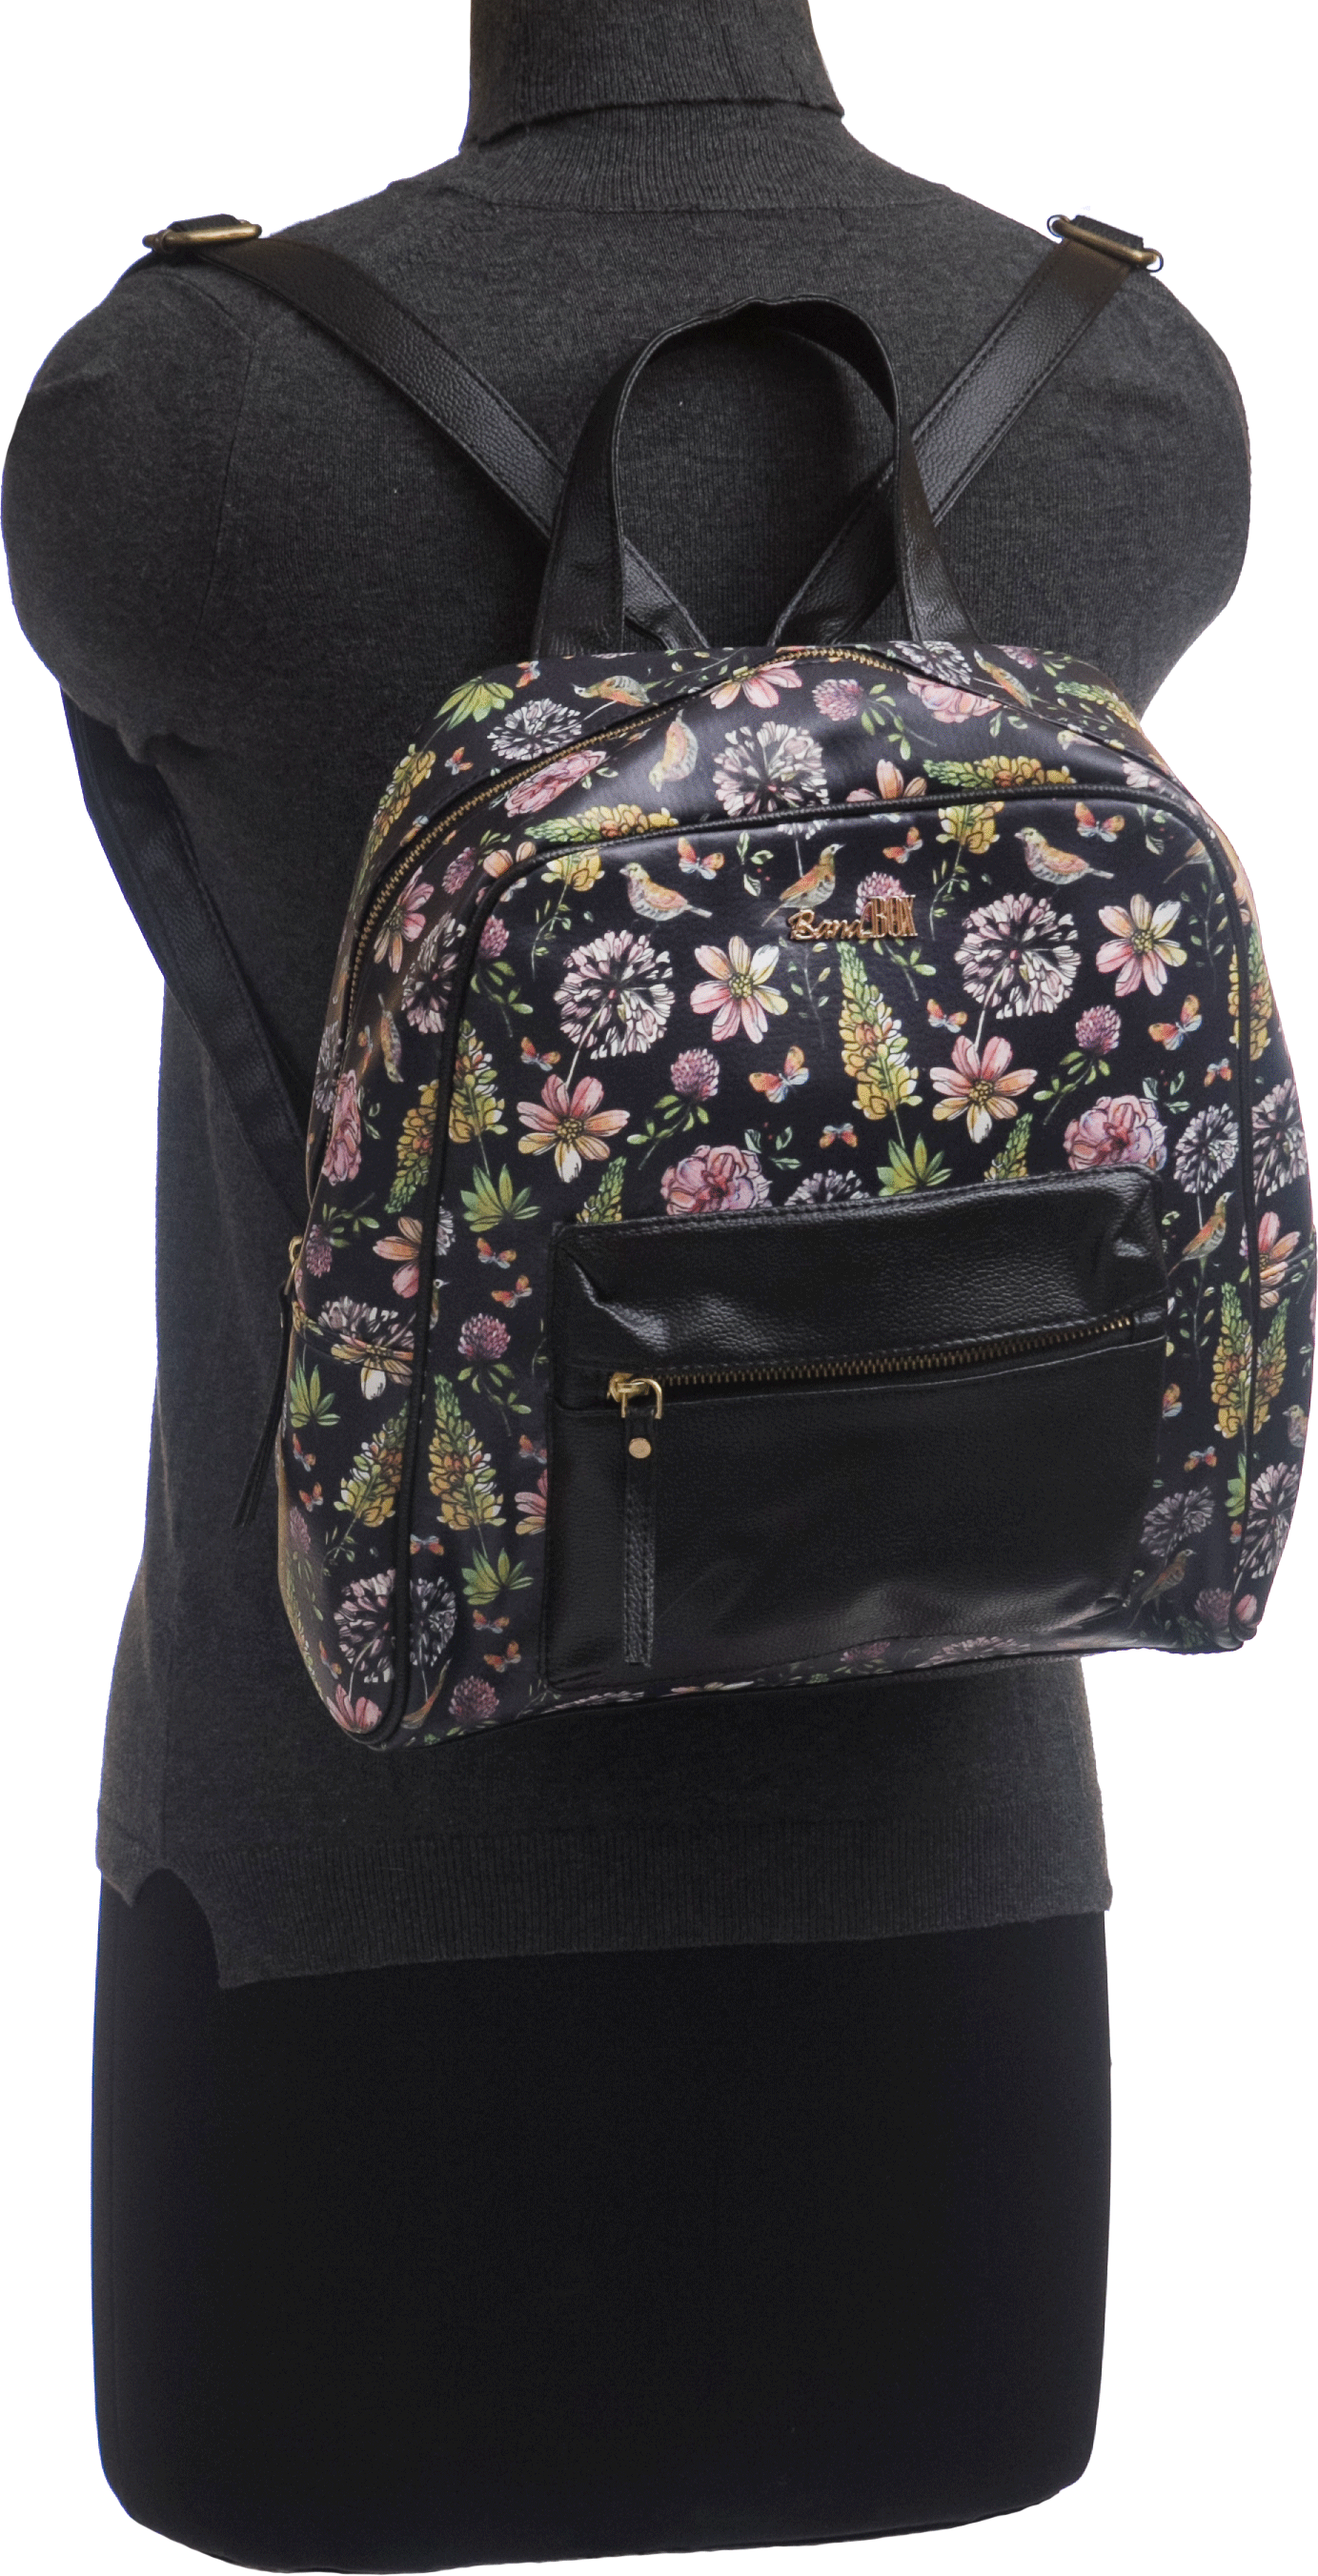 Art Class Black Mini Backpack Purse Faux Leather Embroidered Floral  Adjustable | eBay